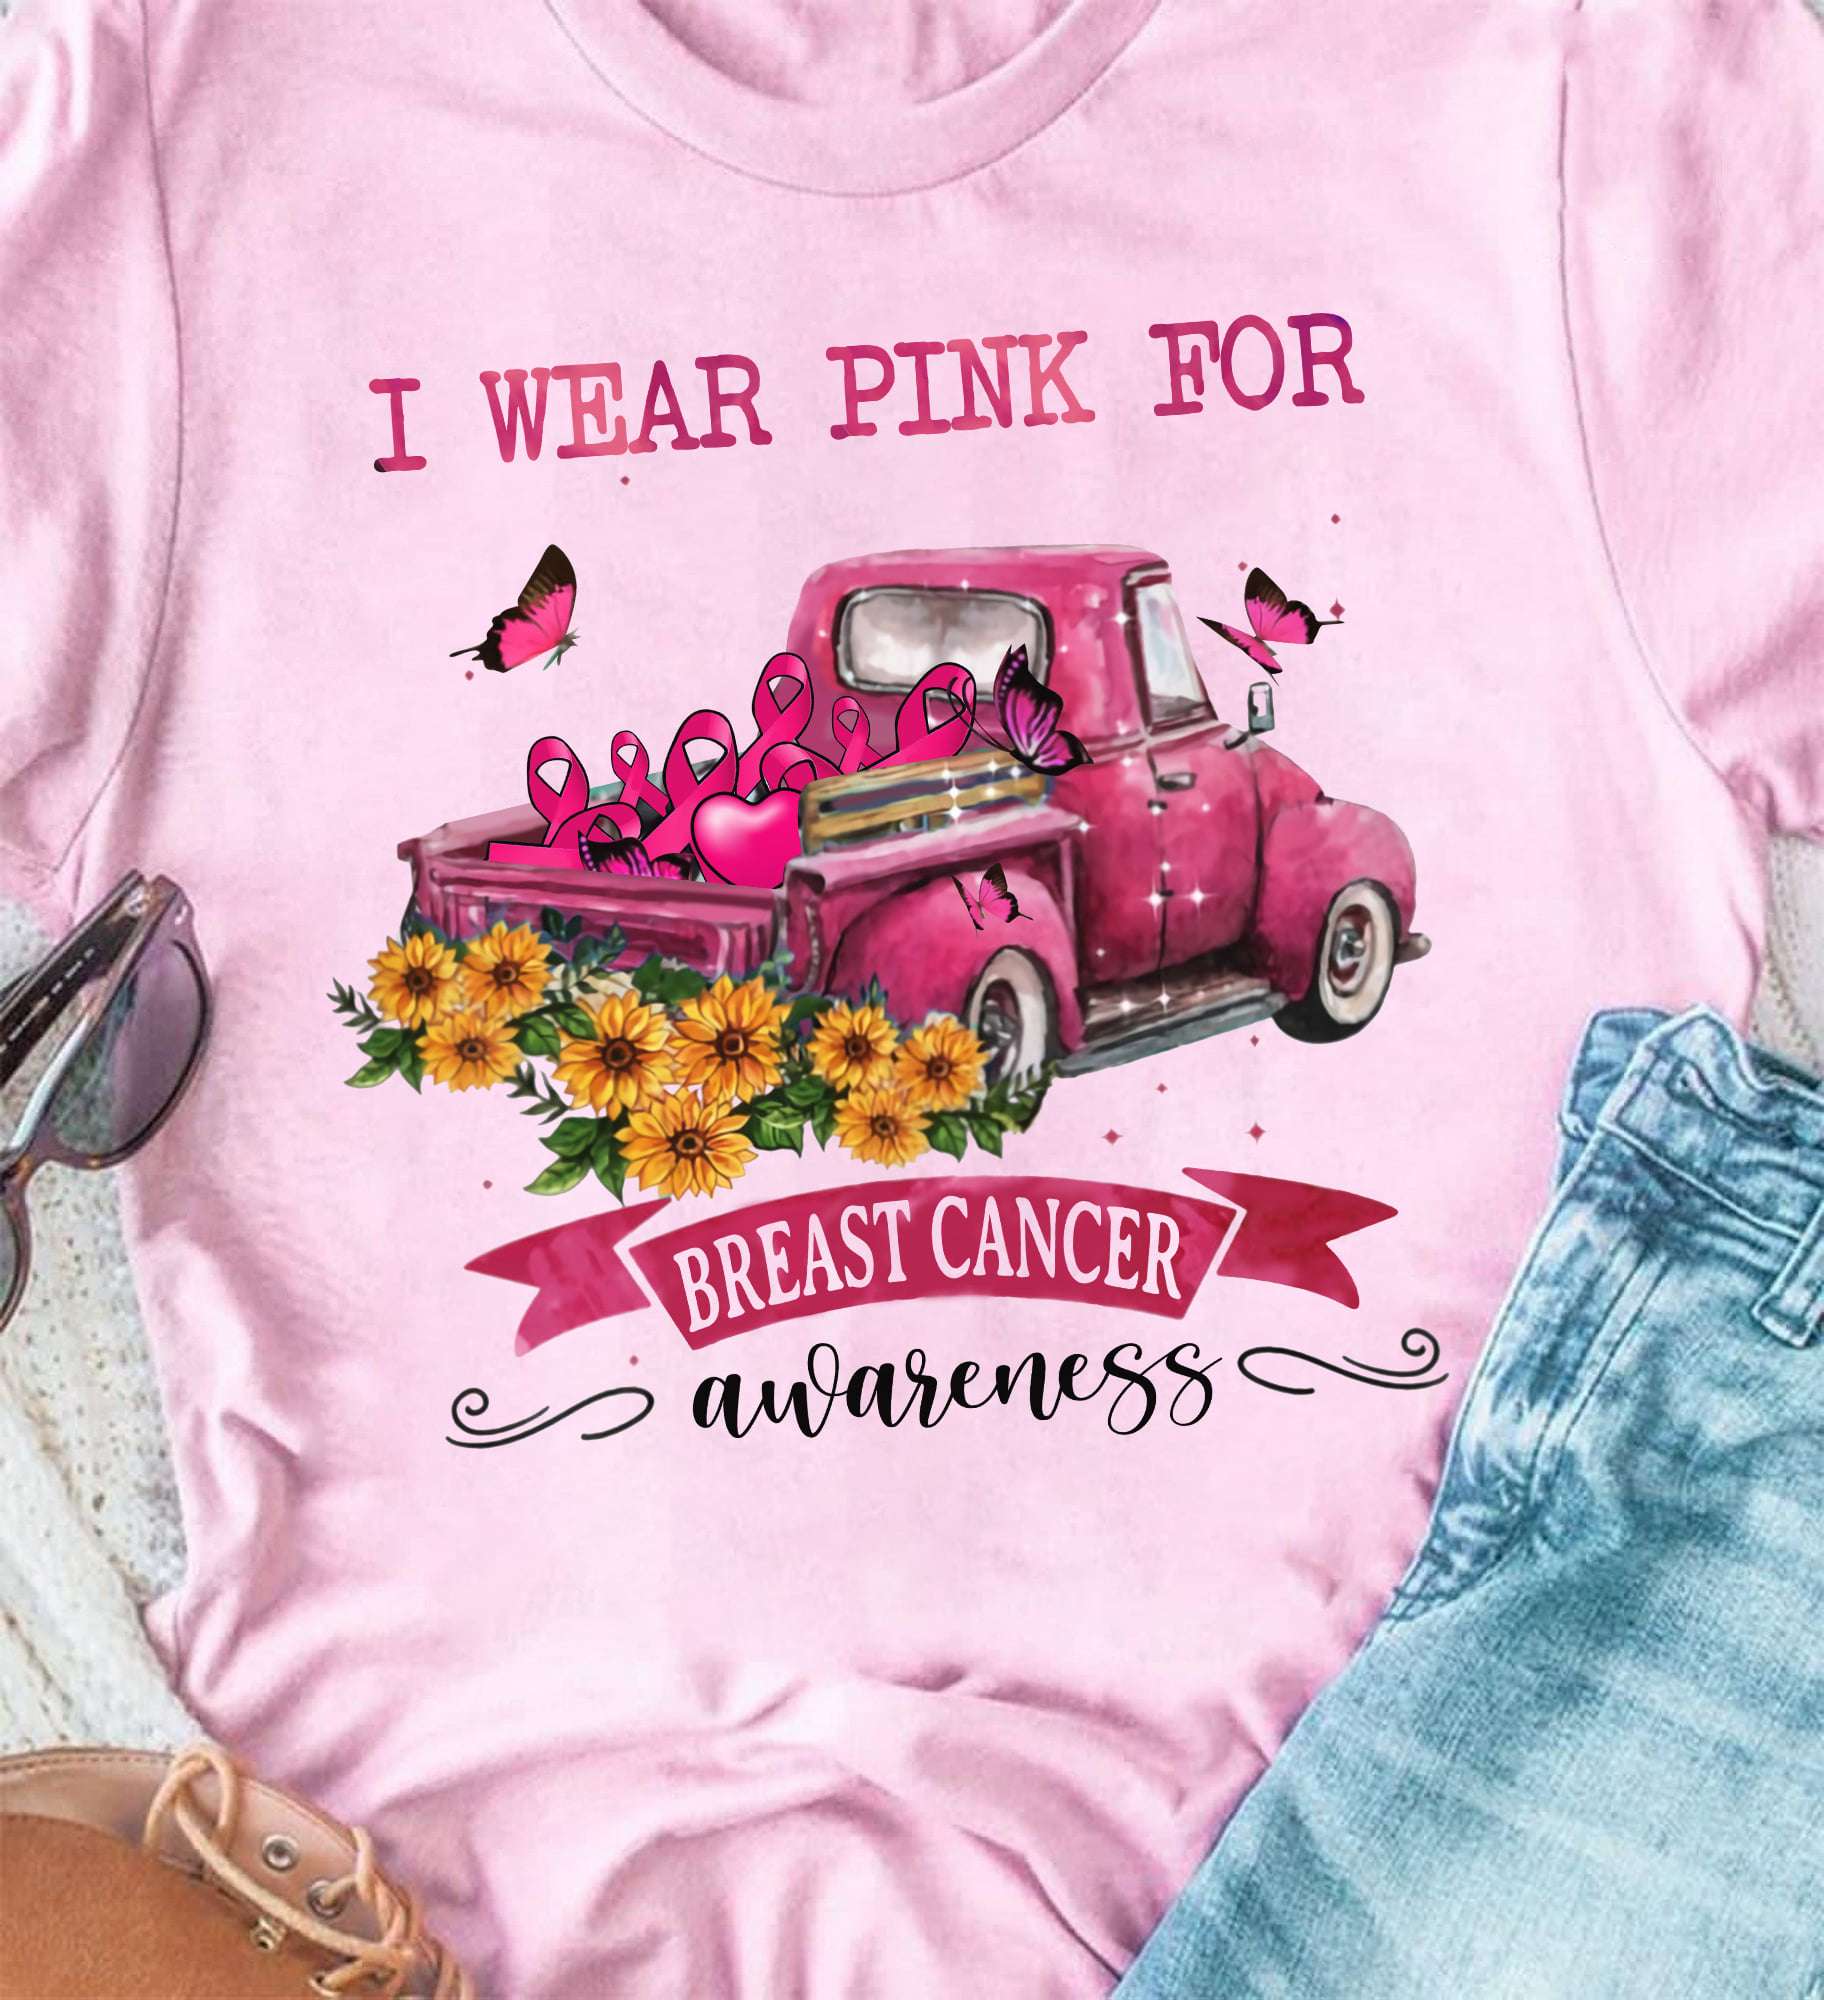 I wear pink for breast cancer awareness - Pink truck with ribbon, beautiful butterflies